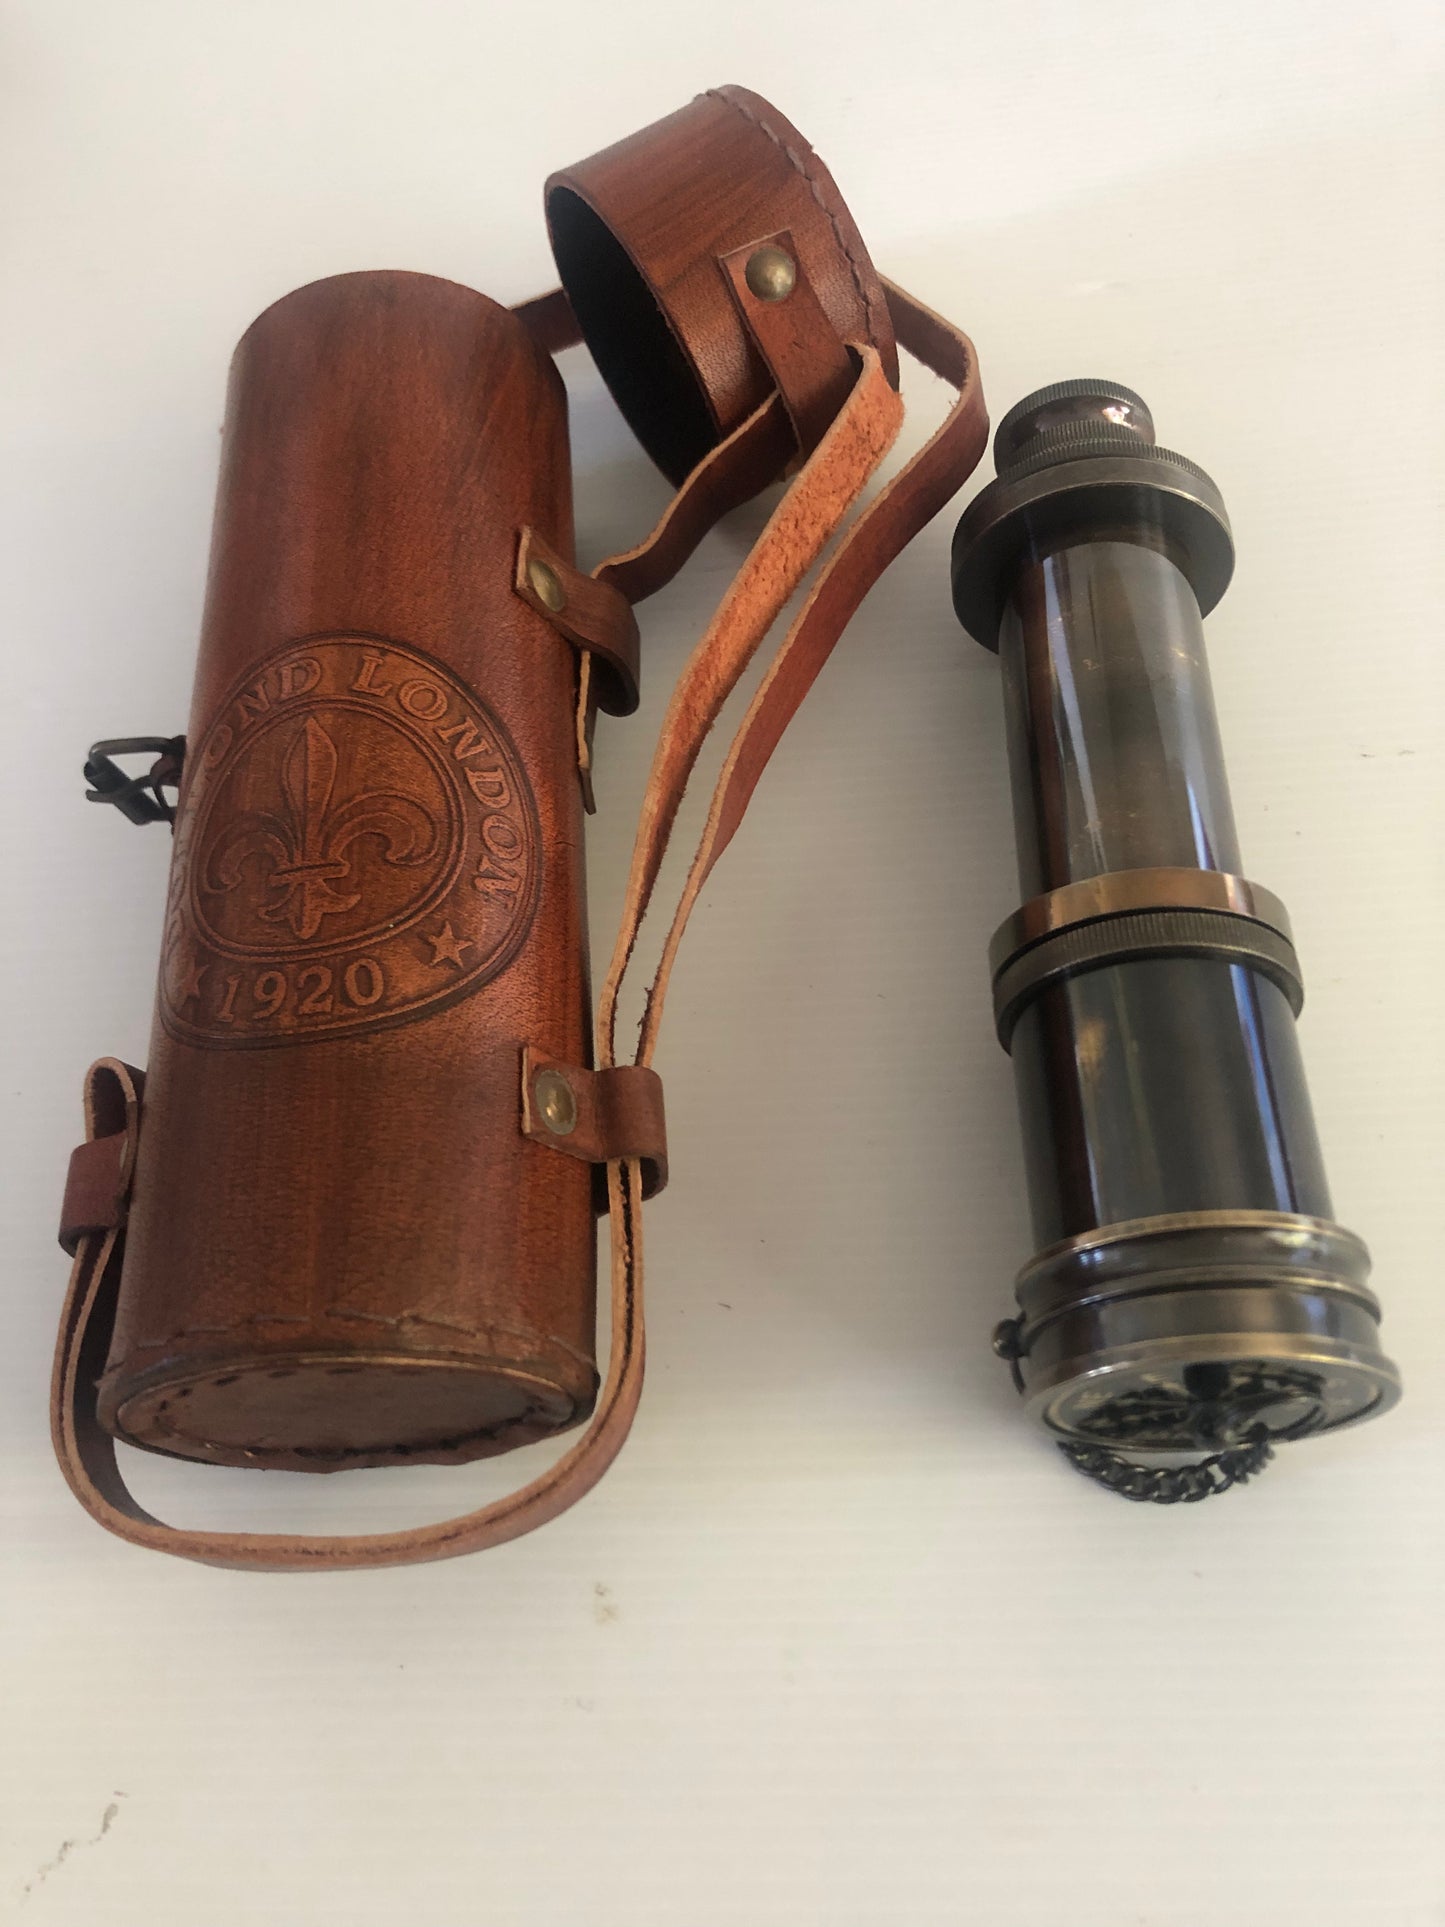 17” Telescope with Pouch